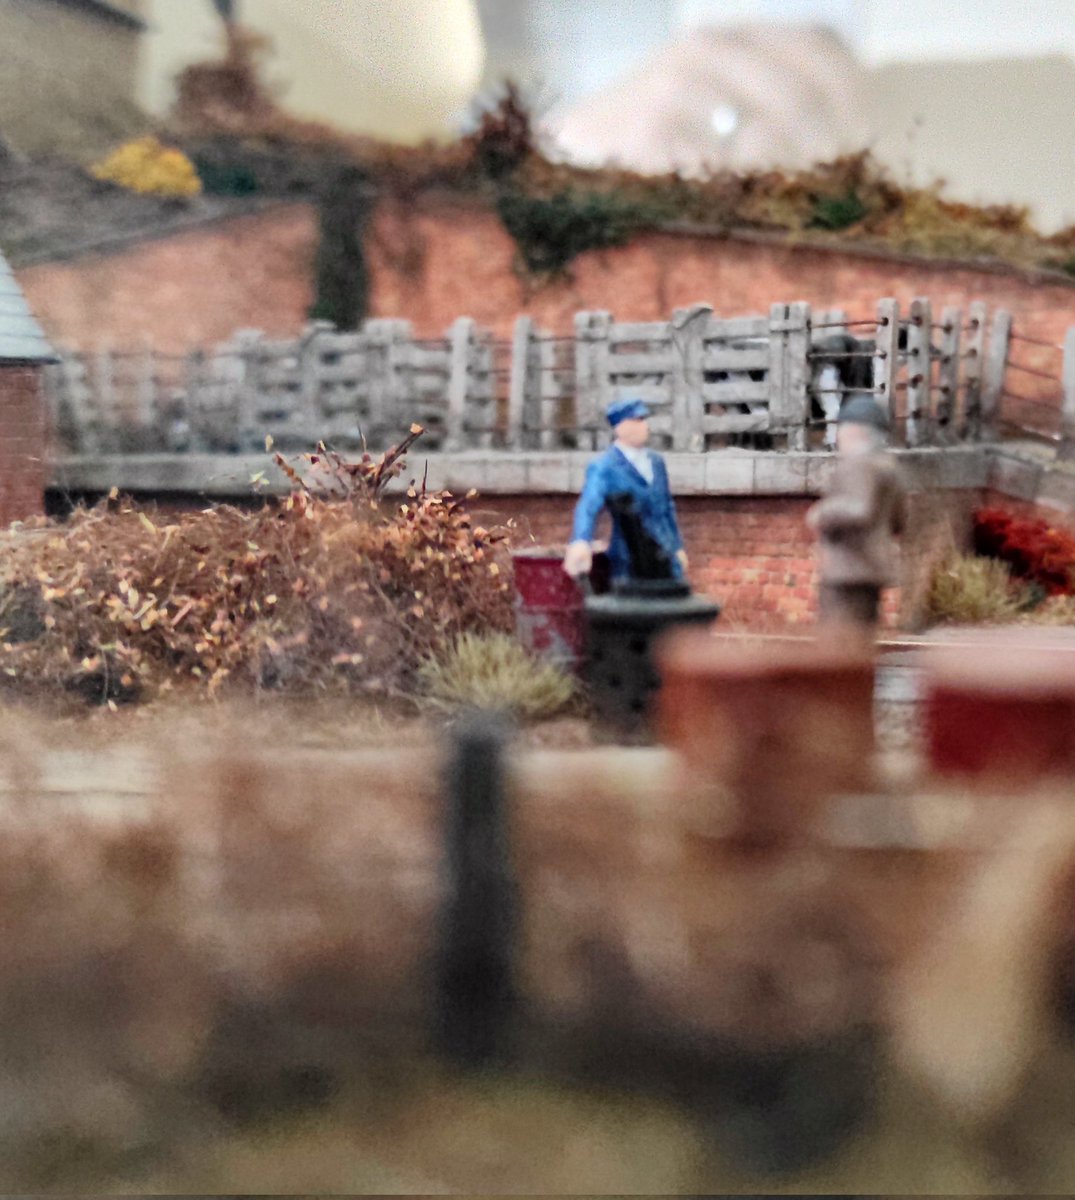 Layout Tour, Day 8: Looking across to the cattle dock from the other side of the layout we can see the gaffer having a conversation with one of the workers.
.
#00gauge #oogauge #4mmscale #176scale #modelrailway #modelrailroad #modeltrains #TMRGUK #modelisme #modelbahn #hoscale